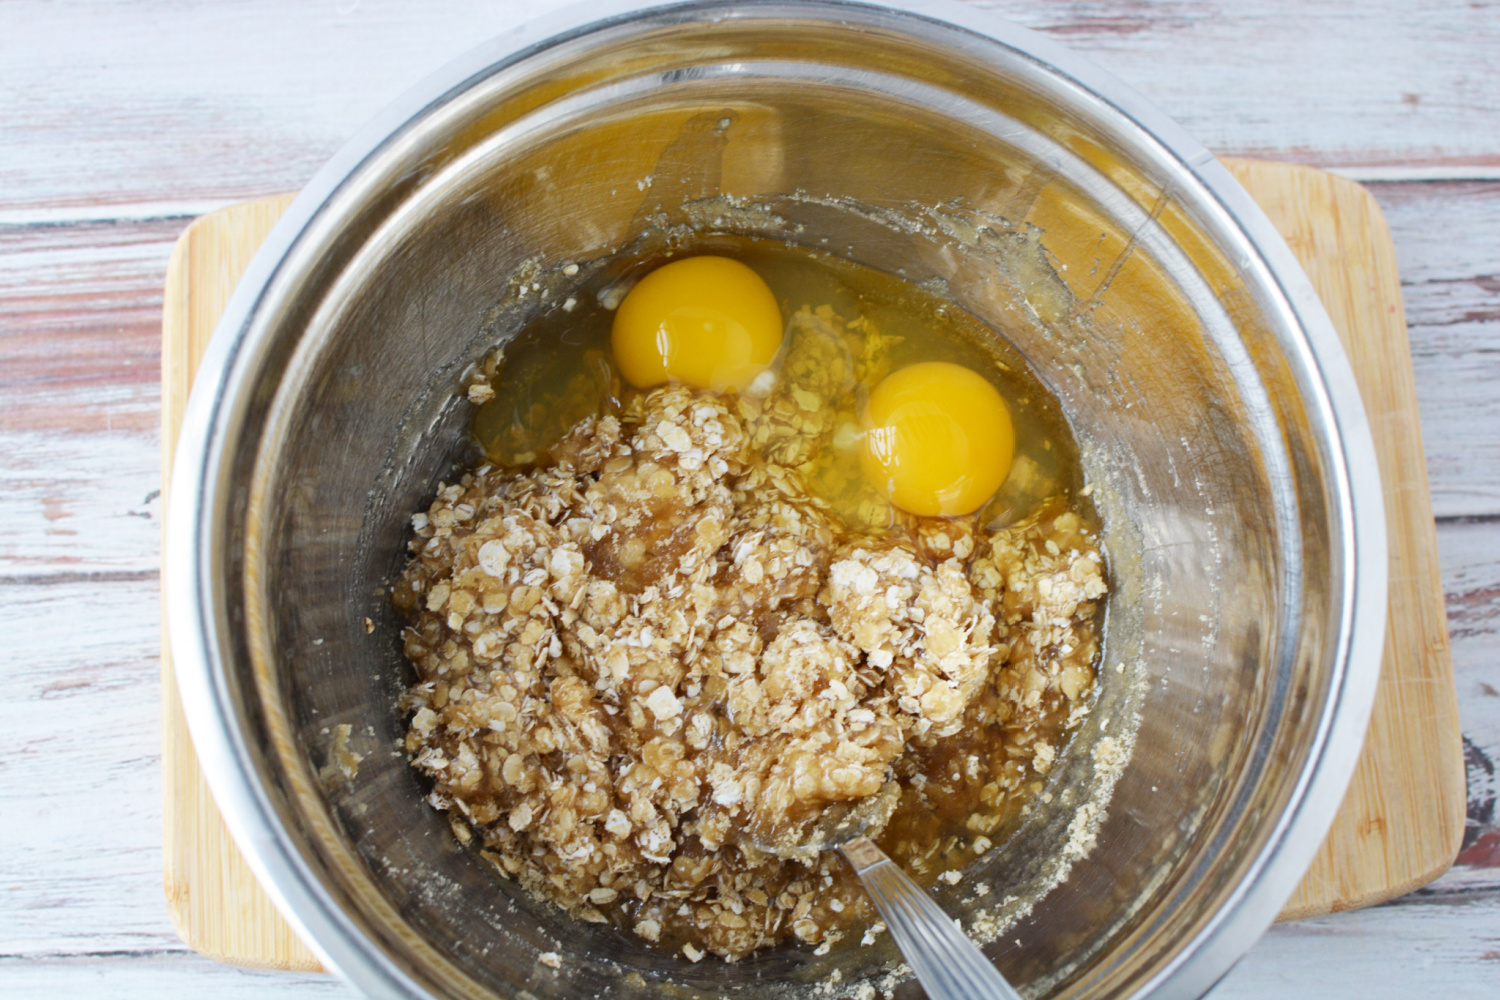 Add oatmeal, eggs and sugar to pie filling